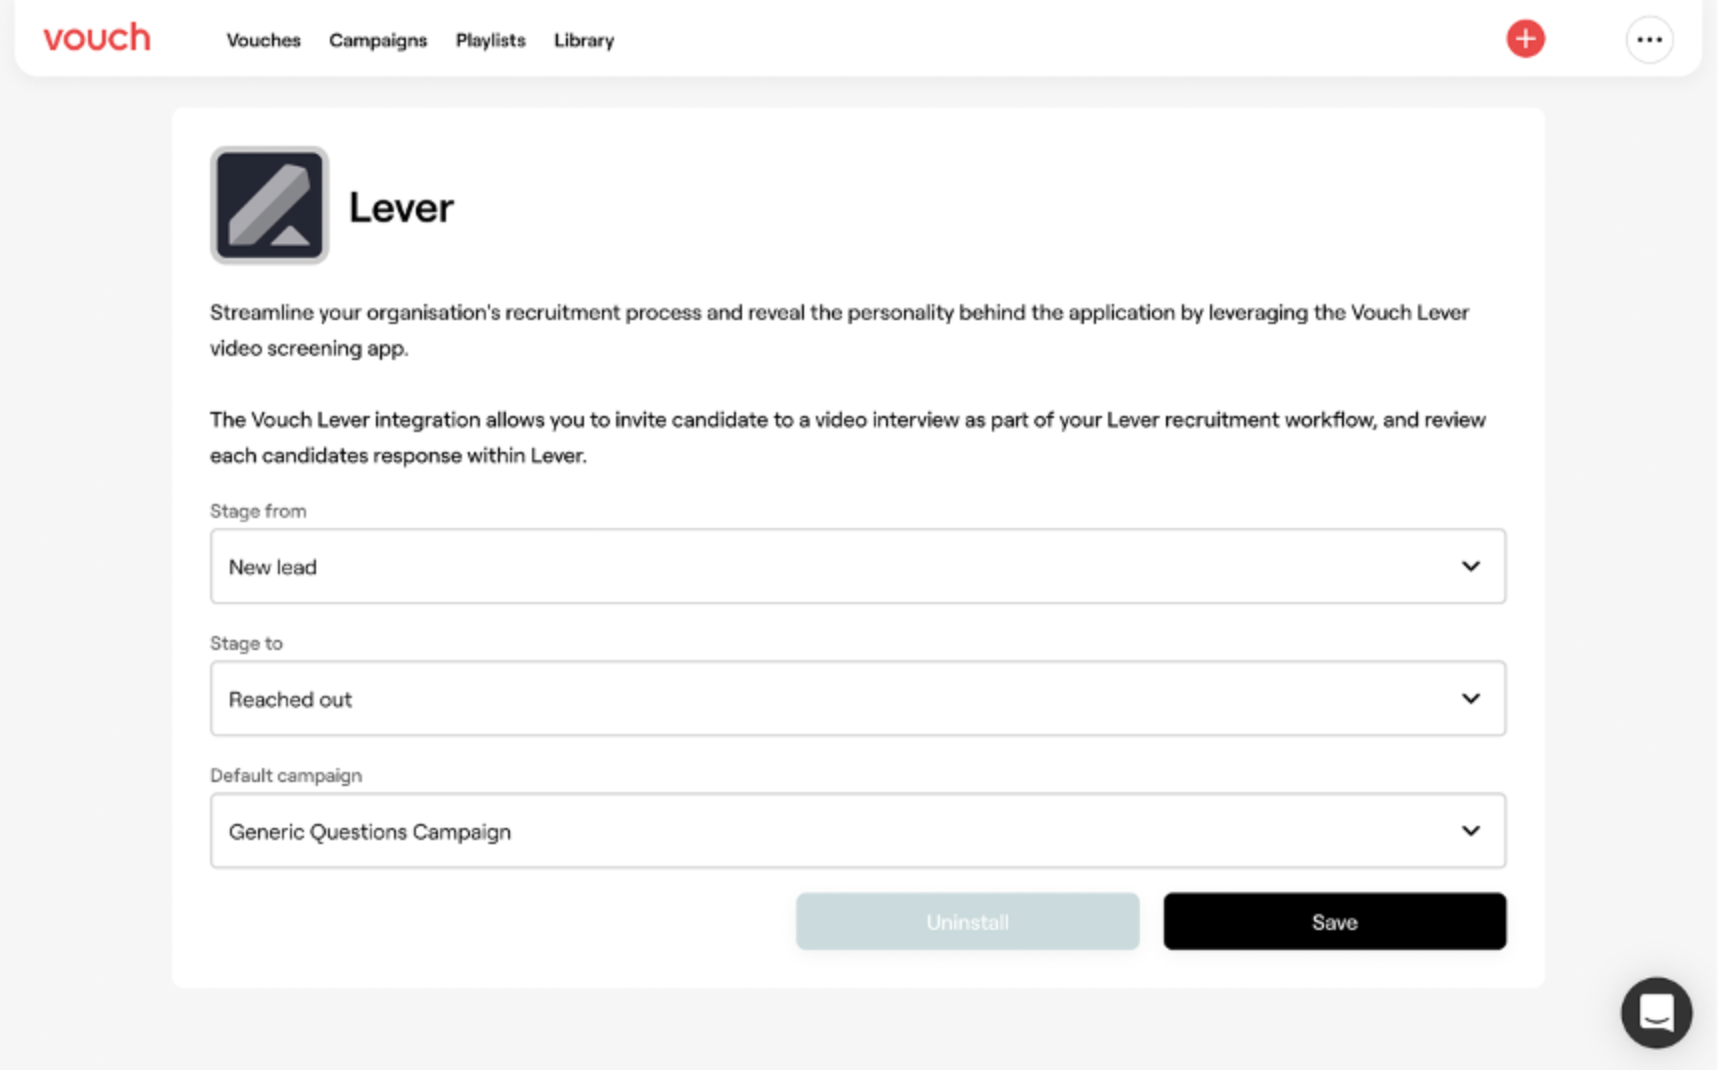 Vouch integrations page showing Lever with setup options